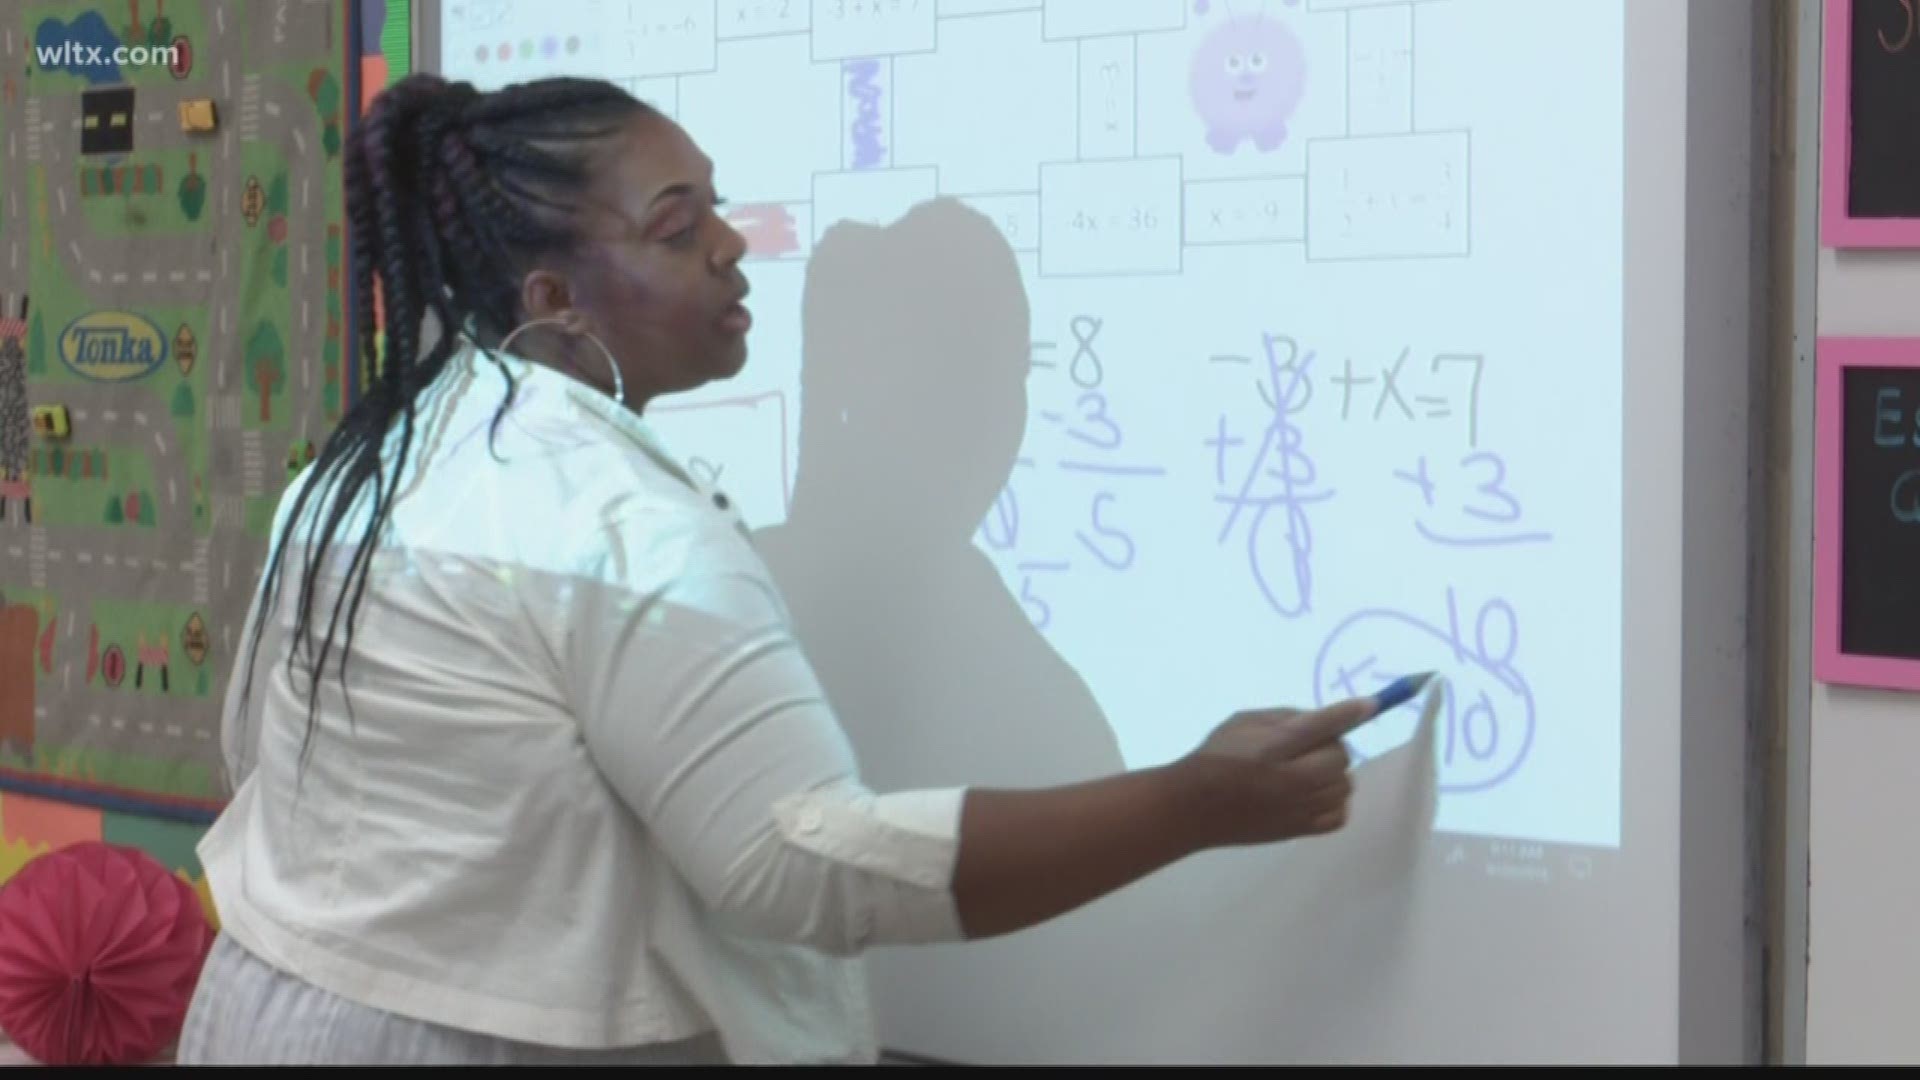 A Richland One teacher has made it her mission to make math fun.